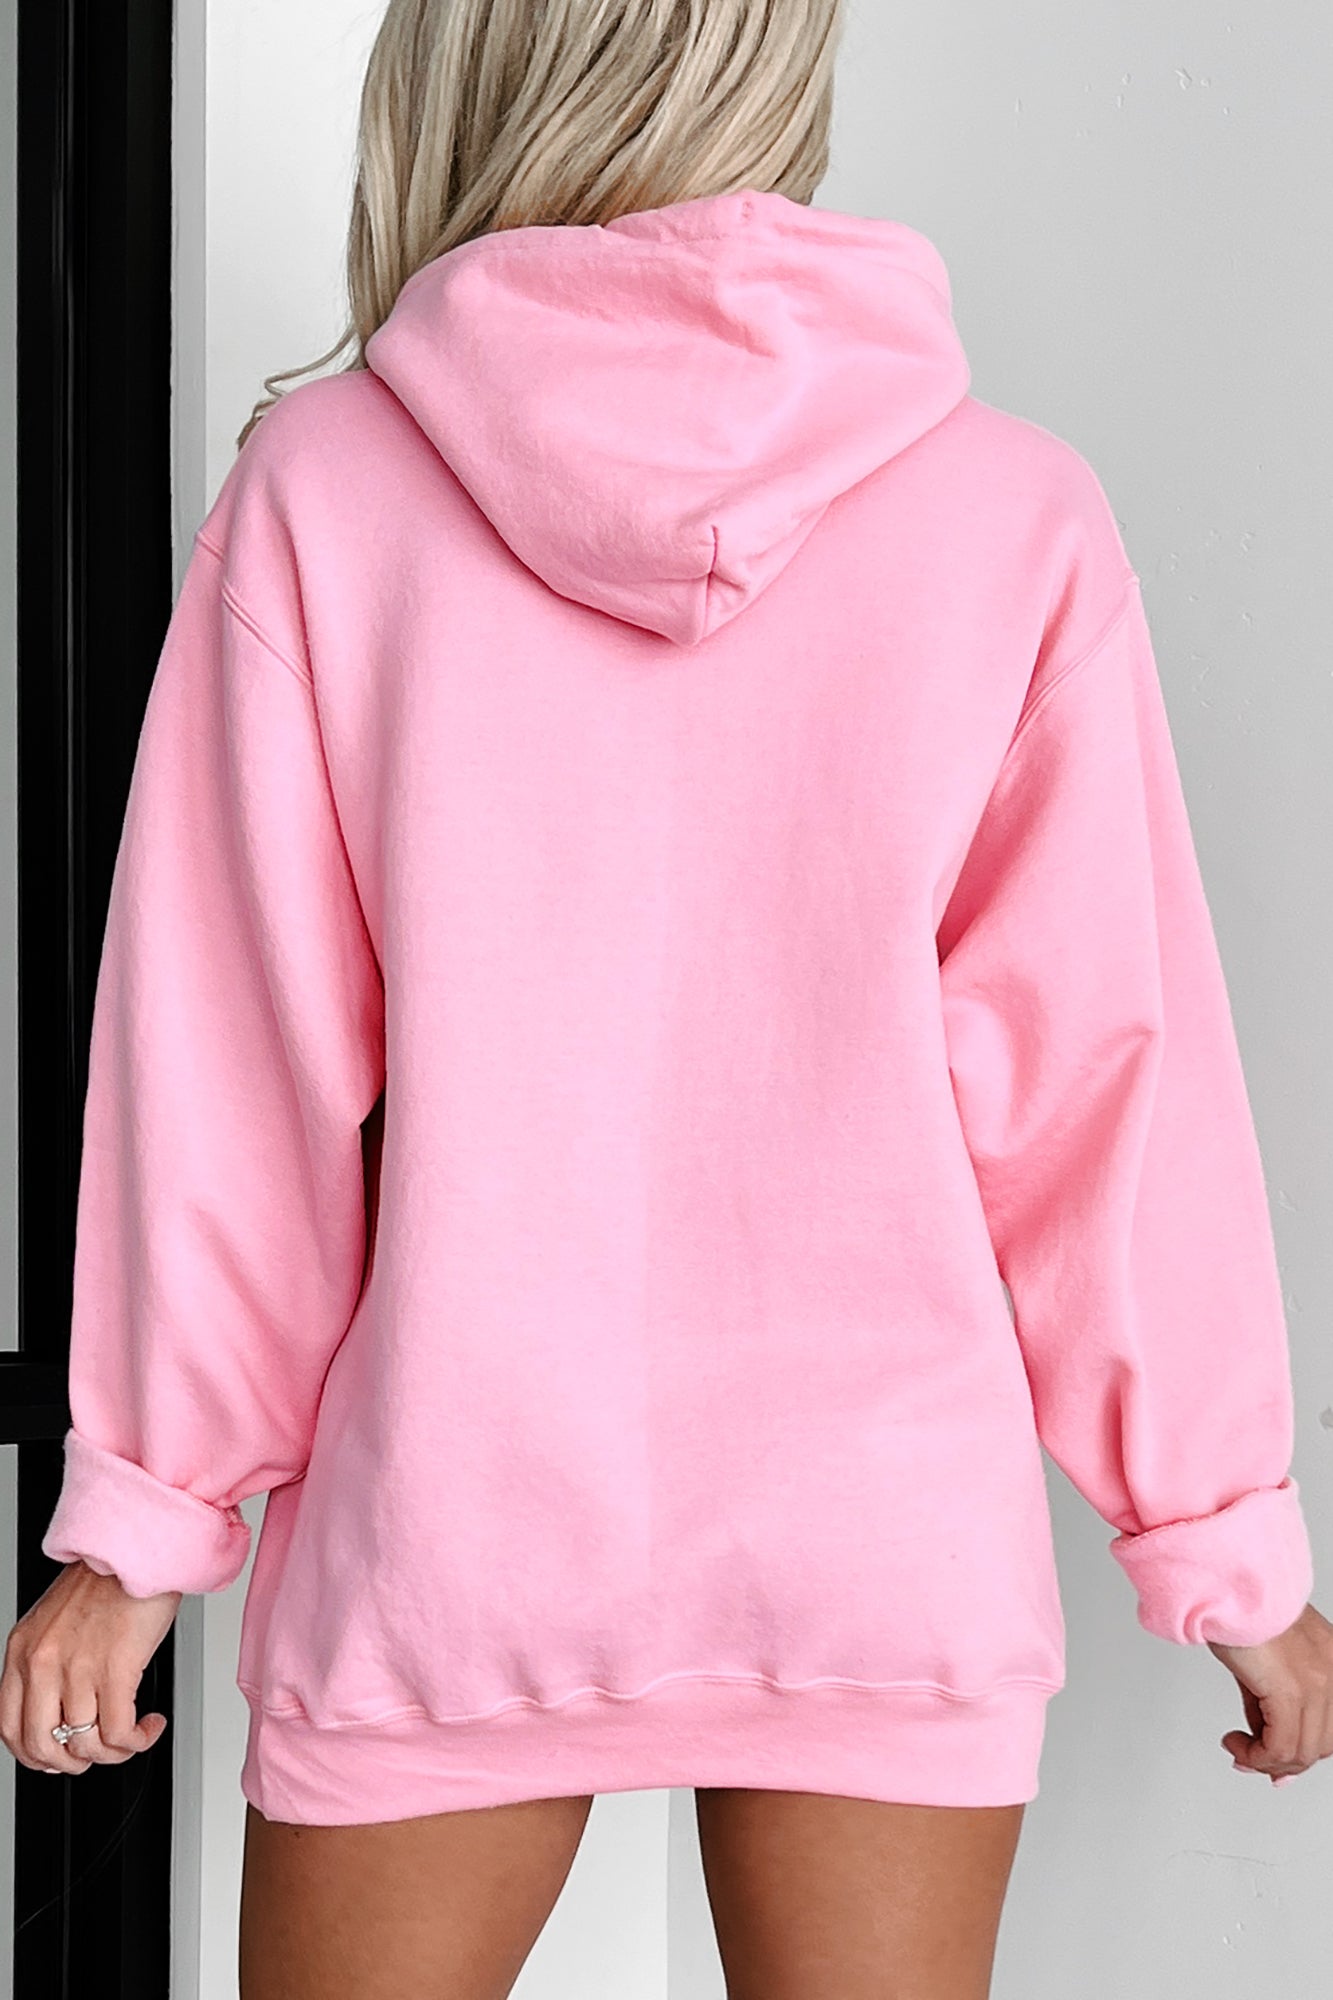 "Gettin' Hitched" Graphic Hoodie (Candy Pink) - Print On Demand - NanaMacs